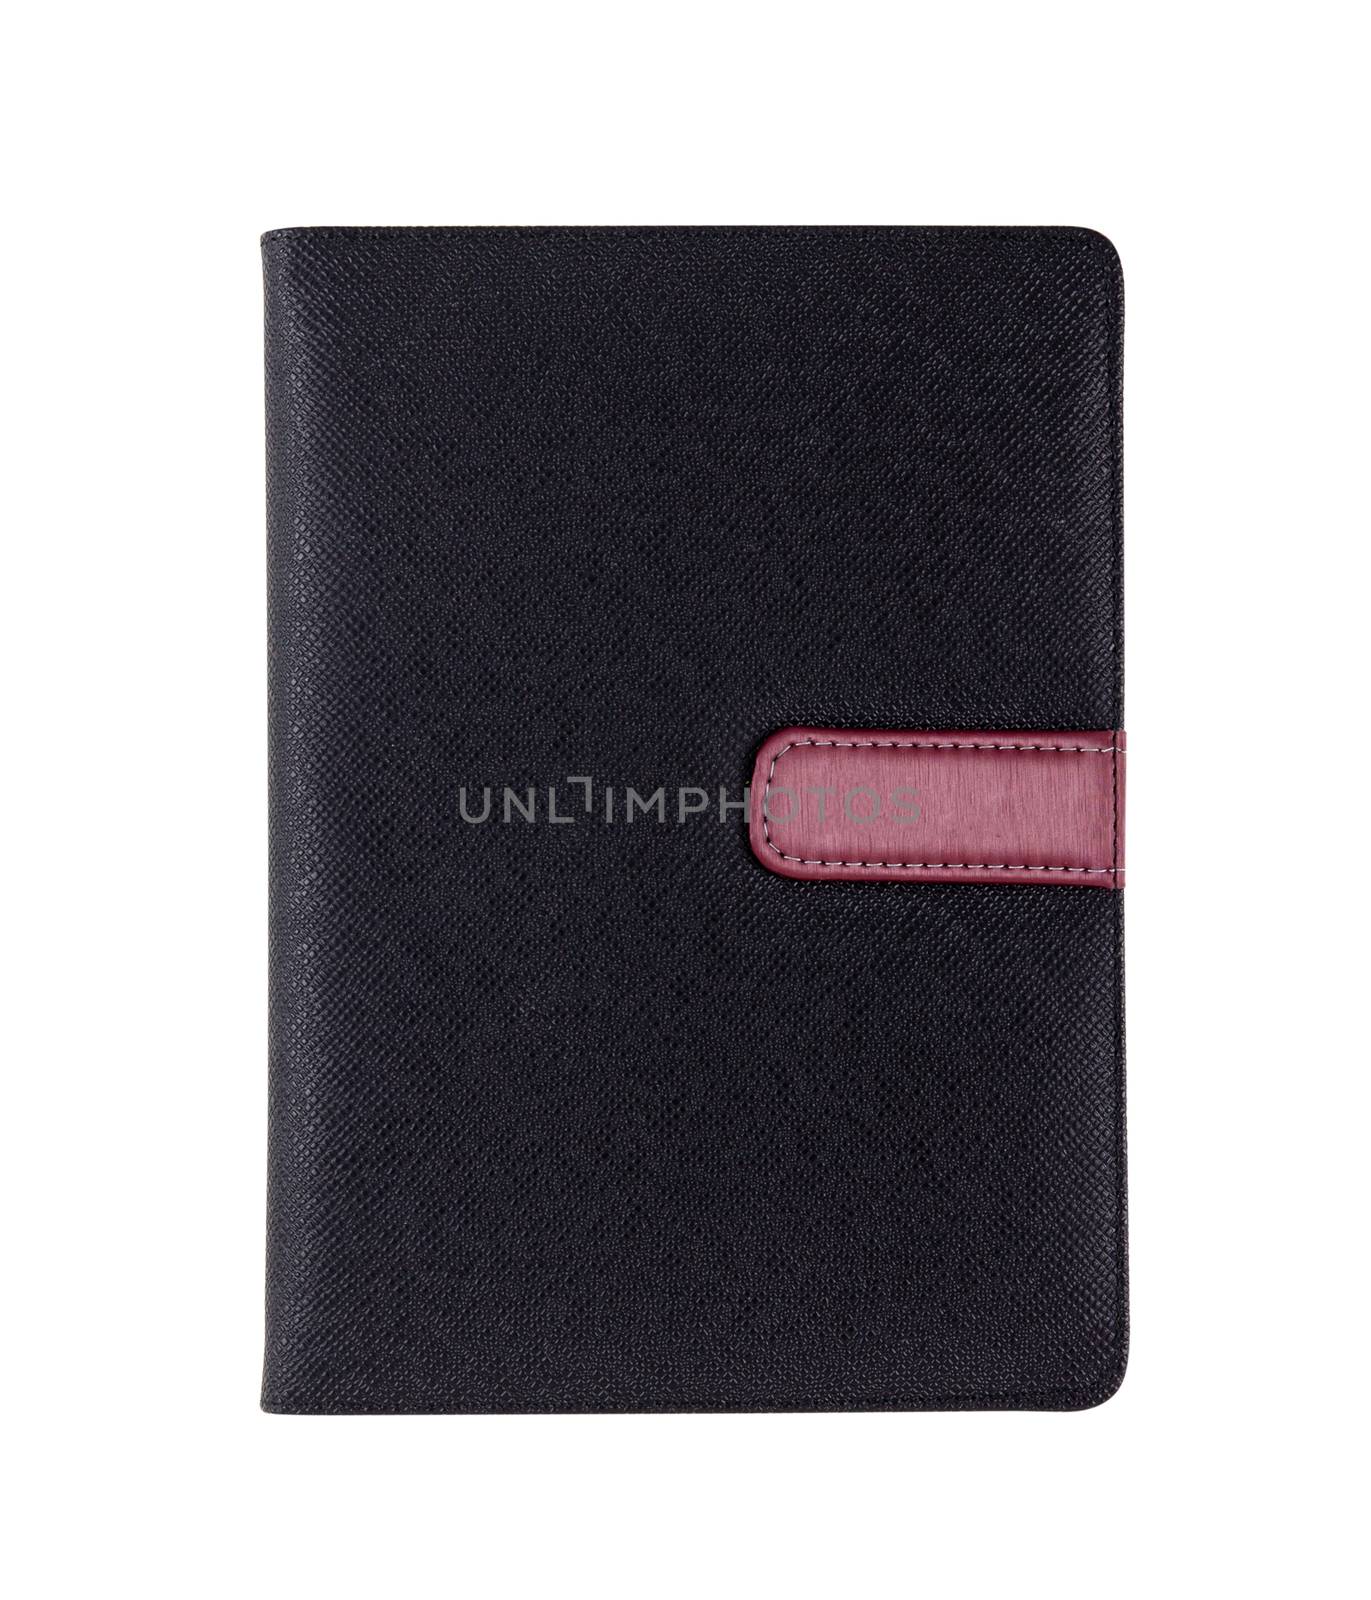 Black cover leather notebook or diary for reminder and memo and  by nnudoo